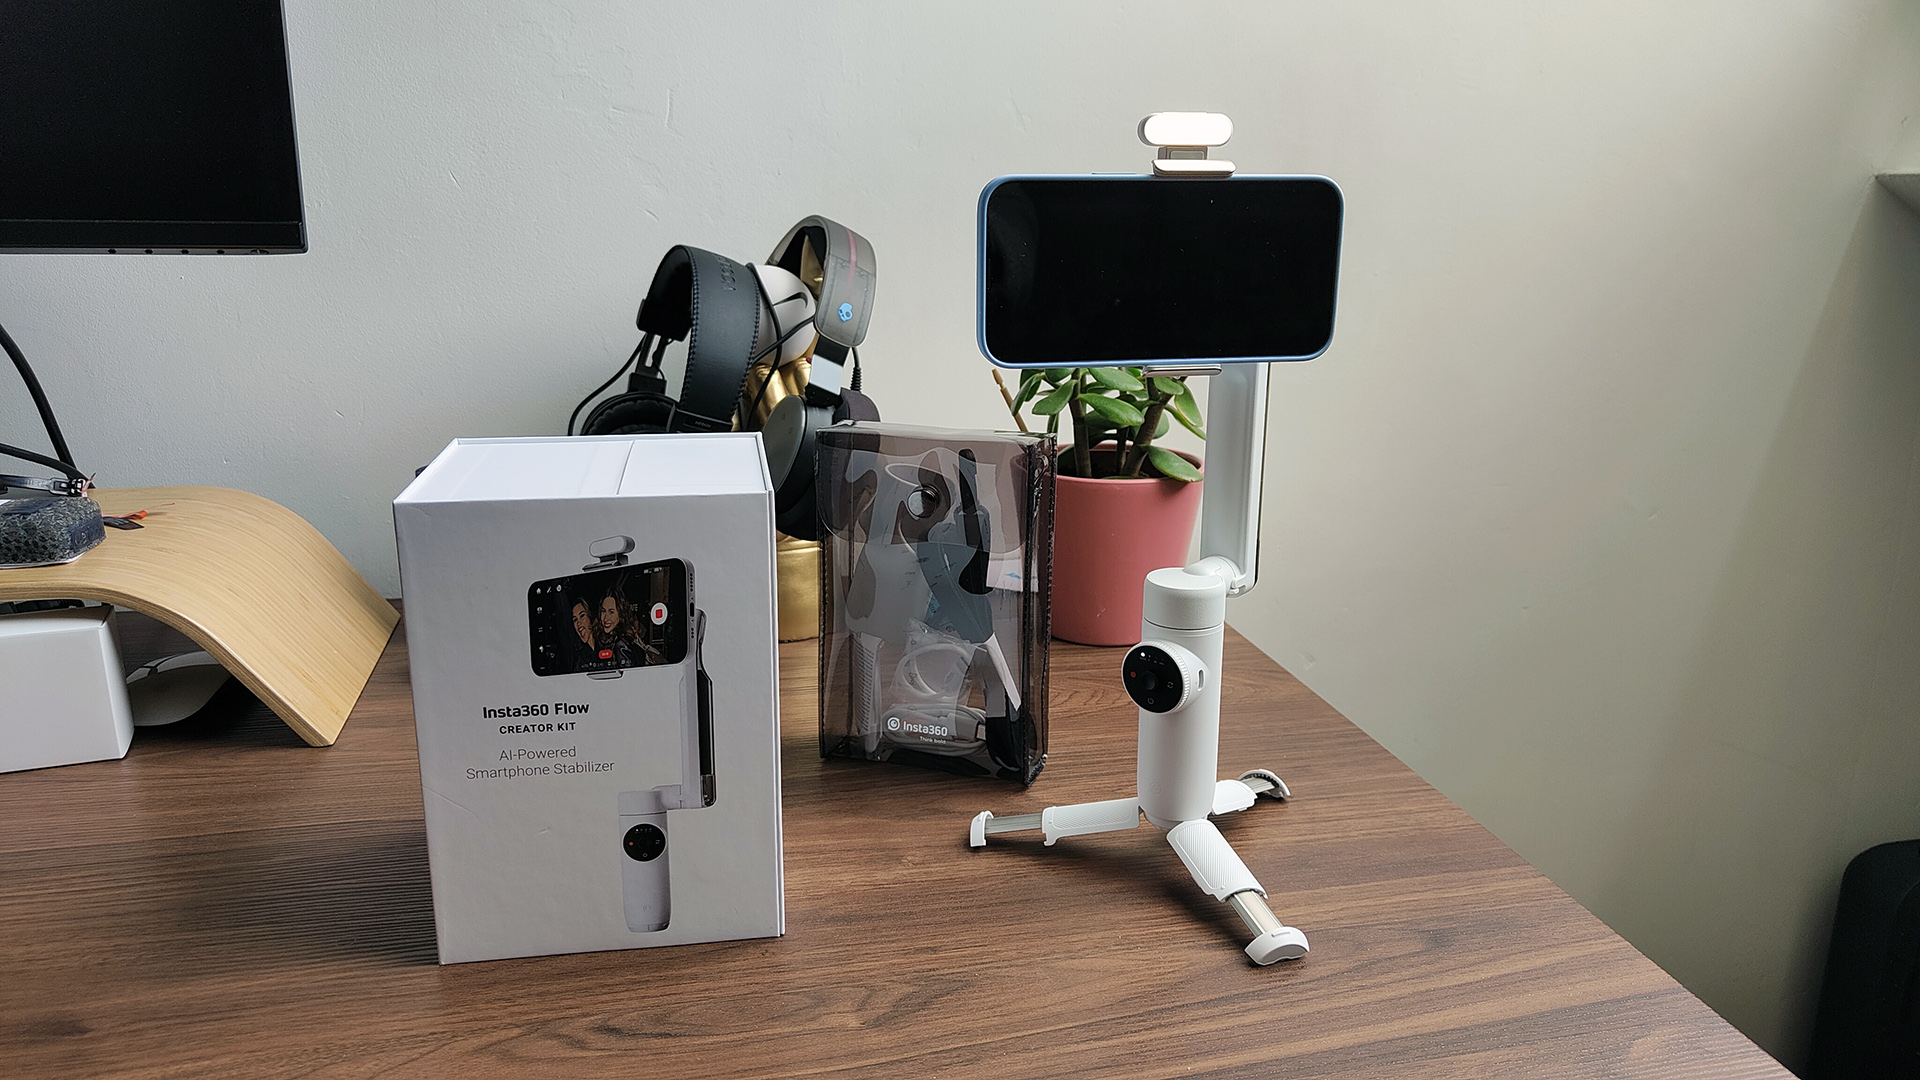 I tried the new Insta360 Flow AI gimbal, and it blew…